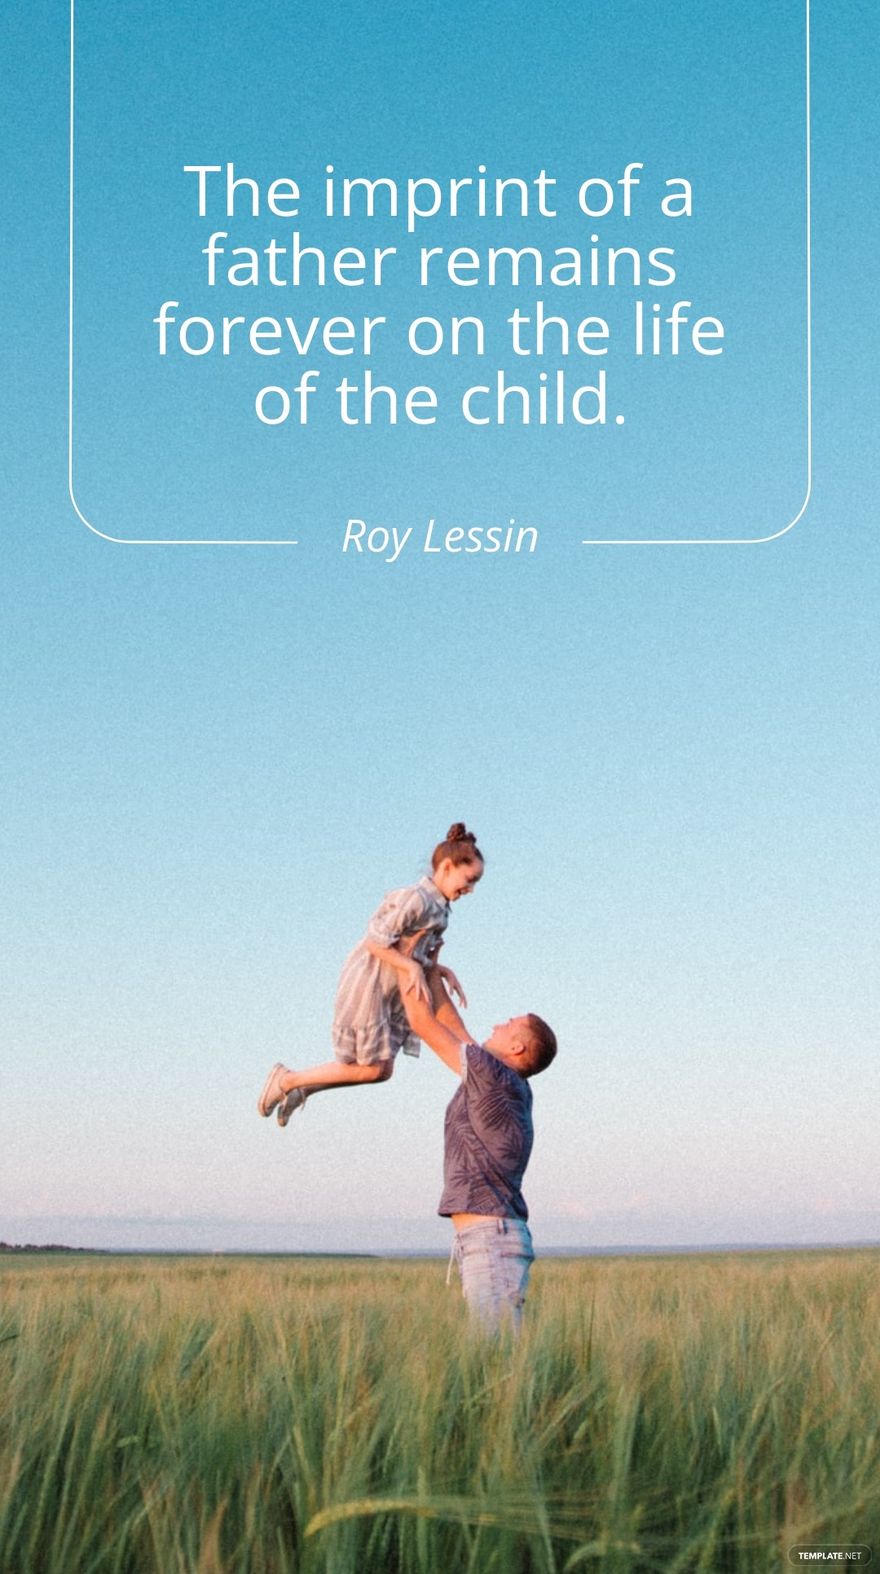 Roy Lessin - The imprint of a father remains forever on the life of the child. in JPG